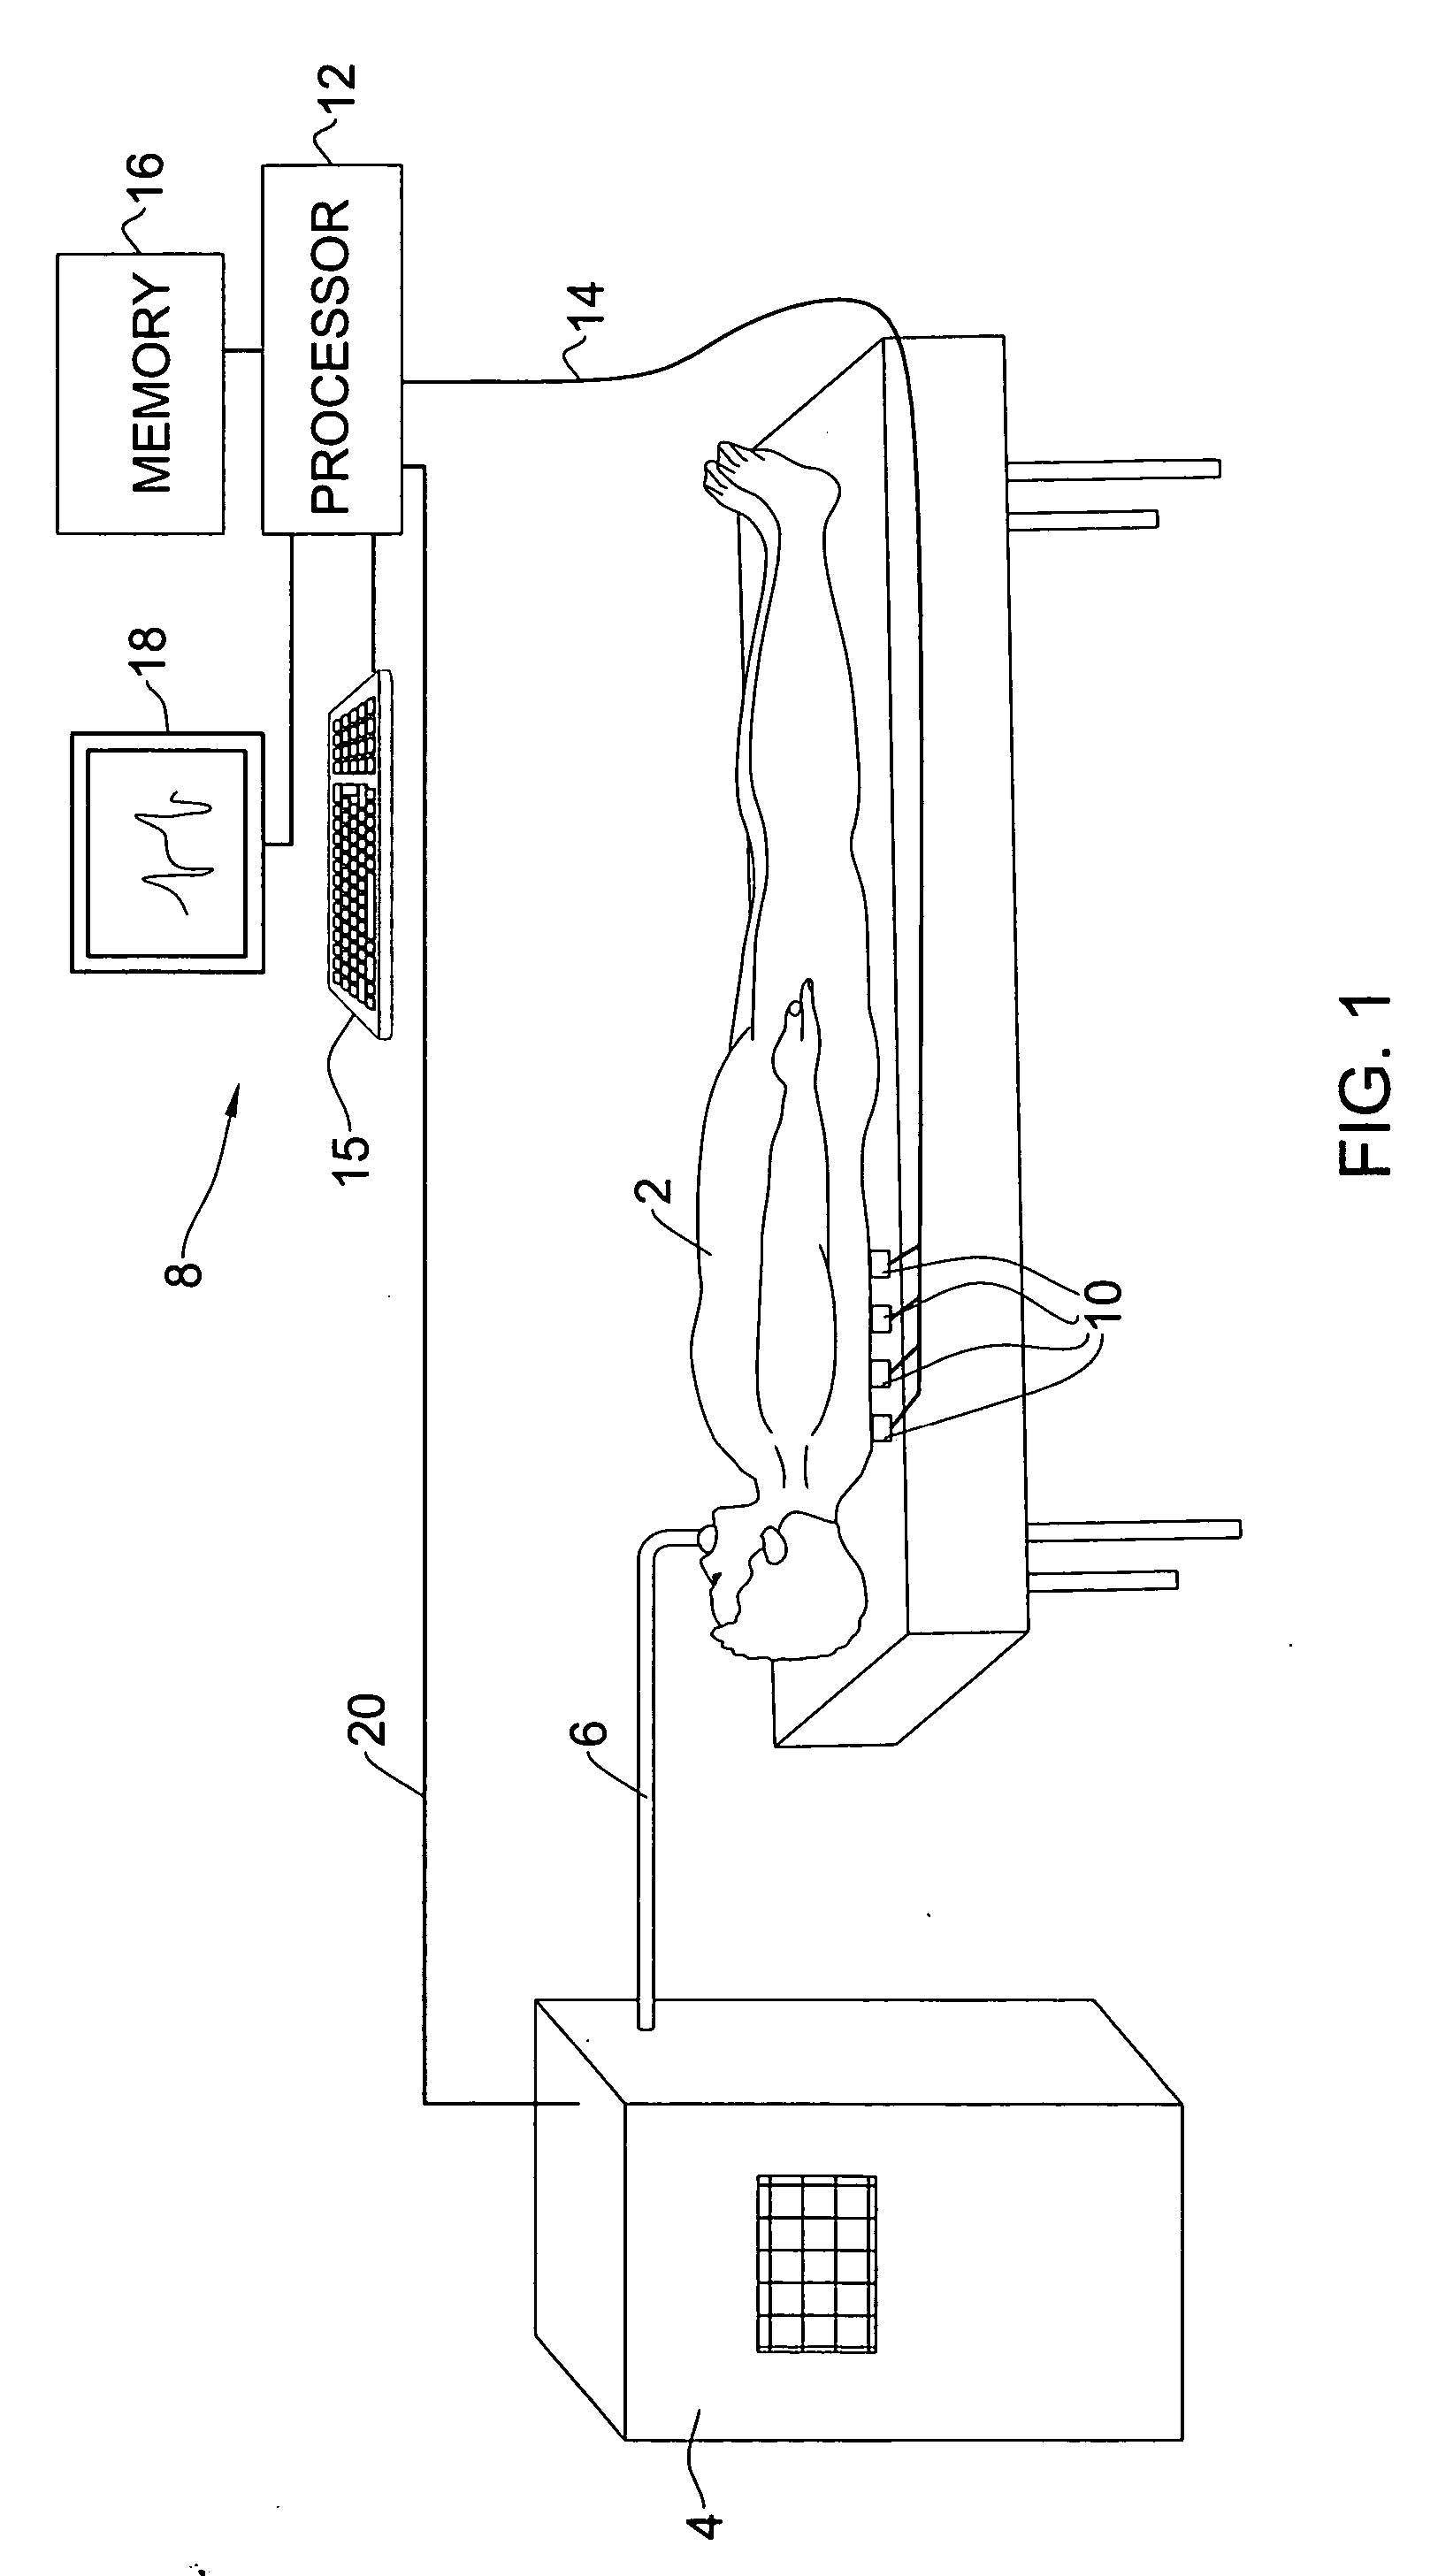 Method and system for managing mechanical respiratory ventilation